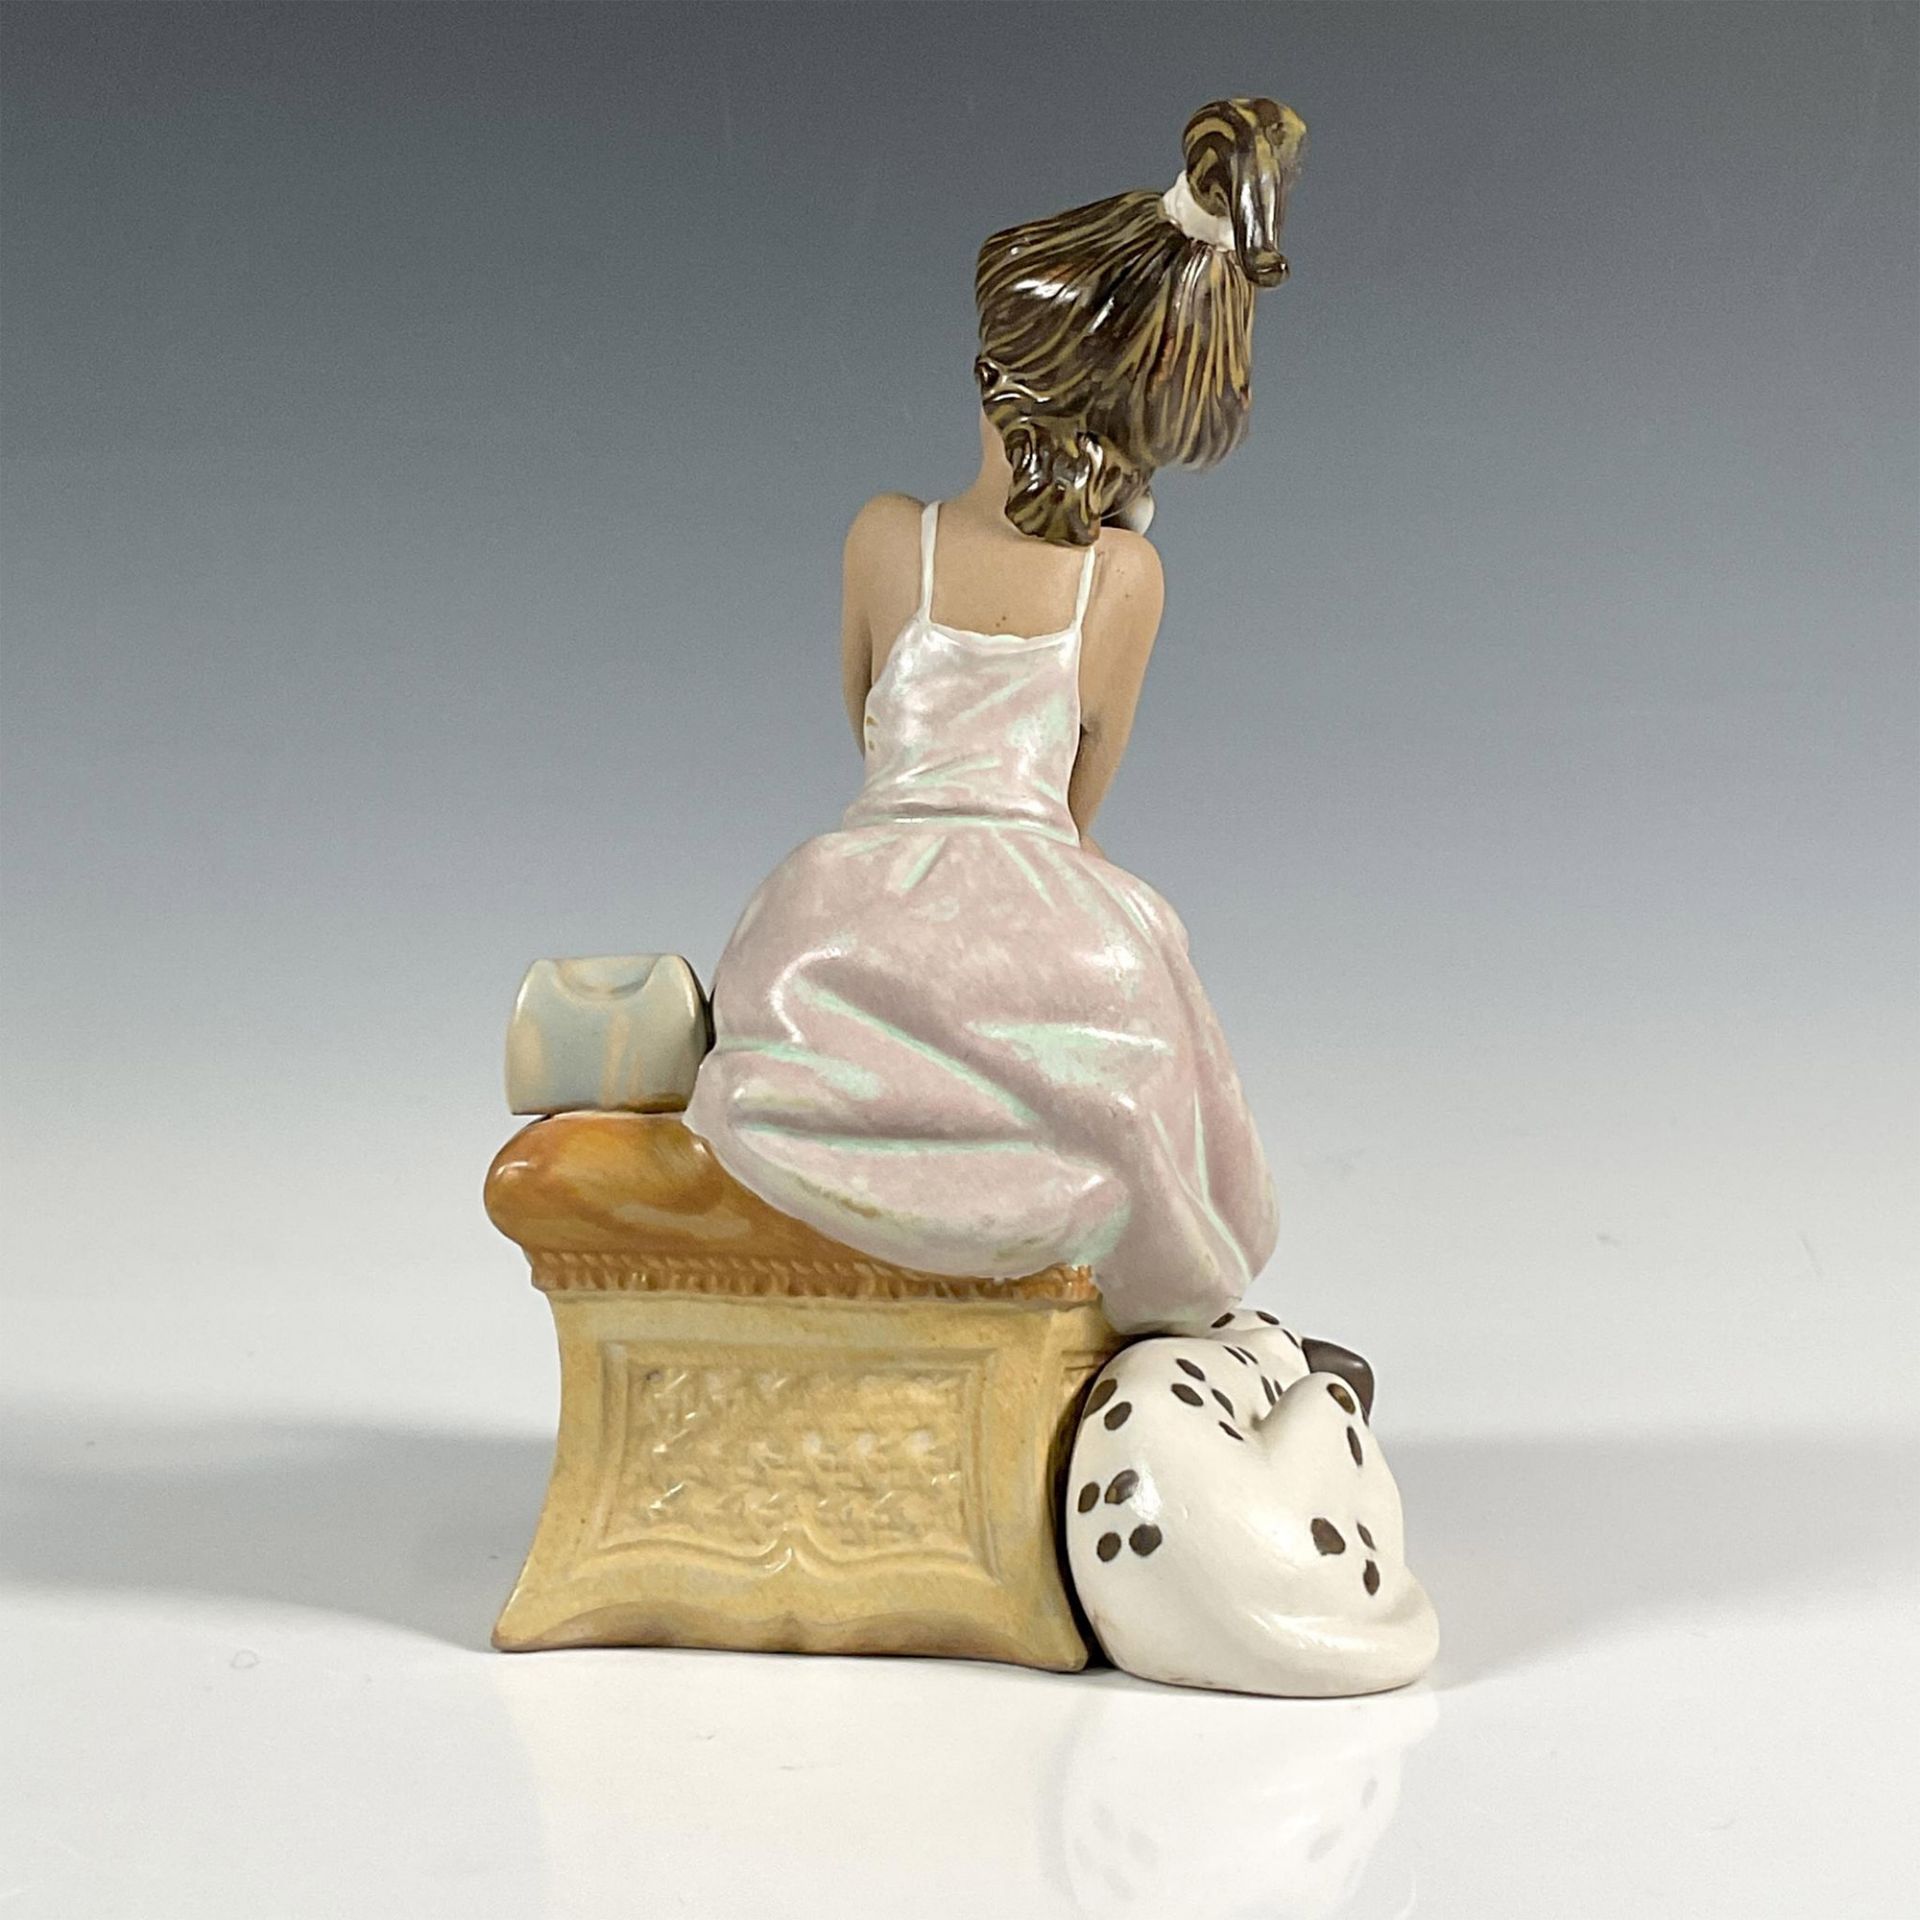 Chit Chat 1015466 - Lladro Porcelain Figurine - Image 4 of 8